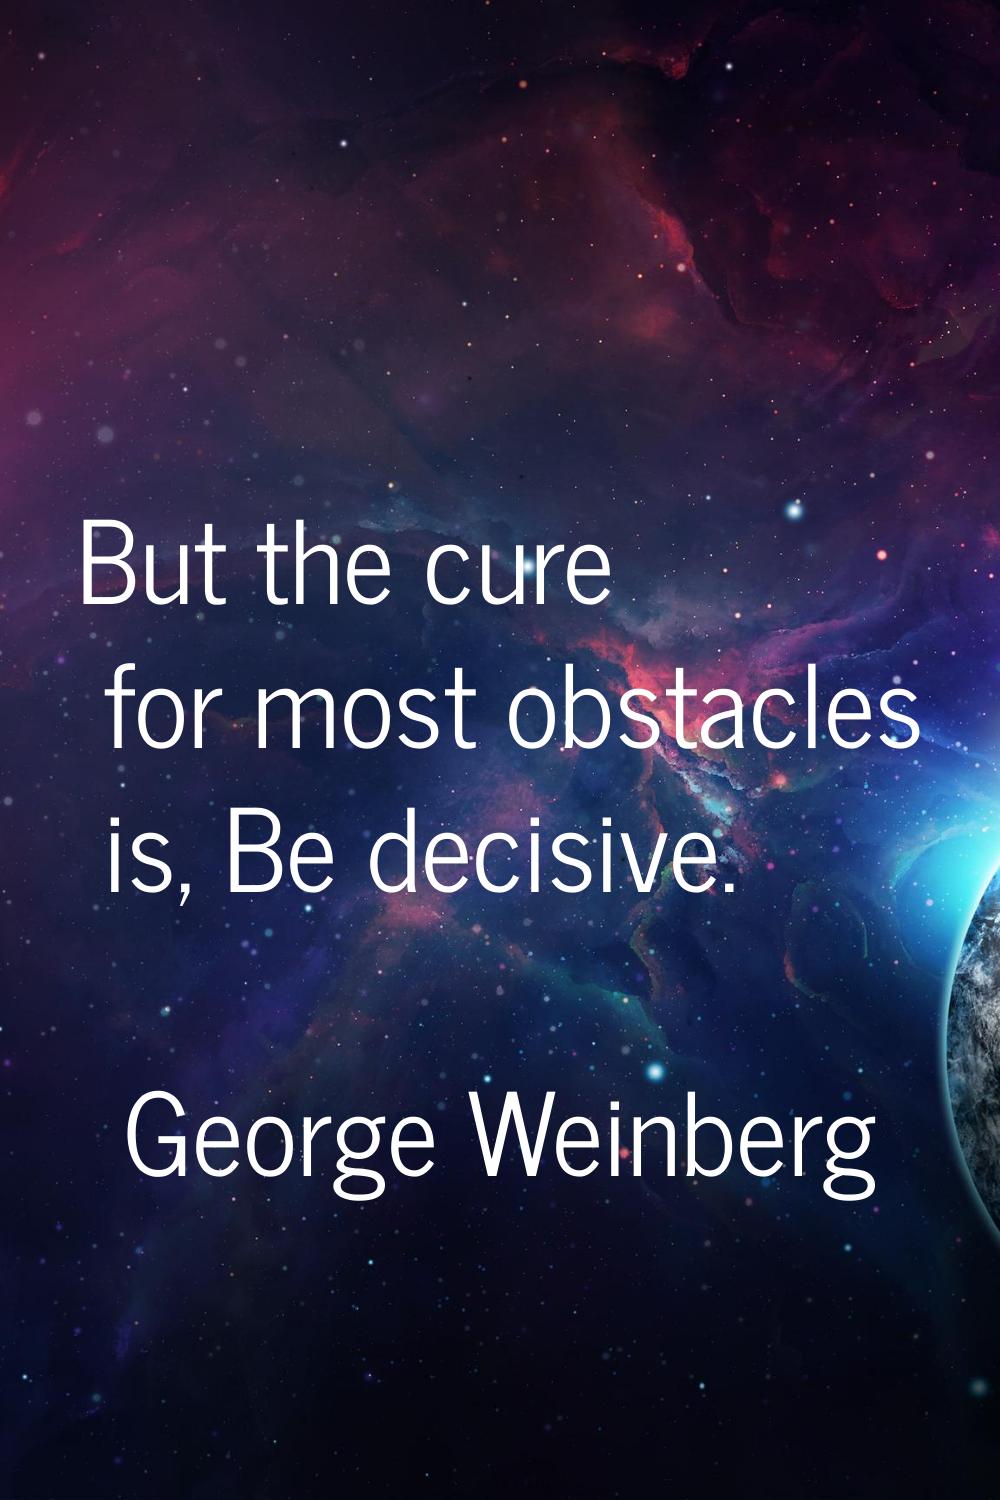 But the cure for most obstacles is, Be decisive.